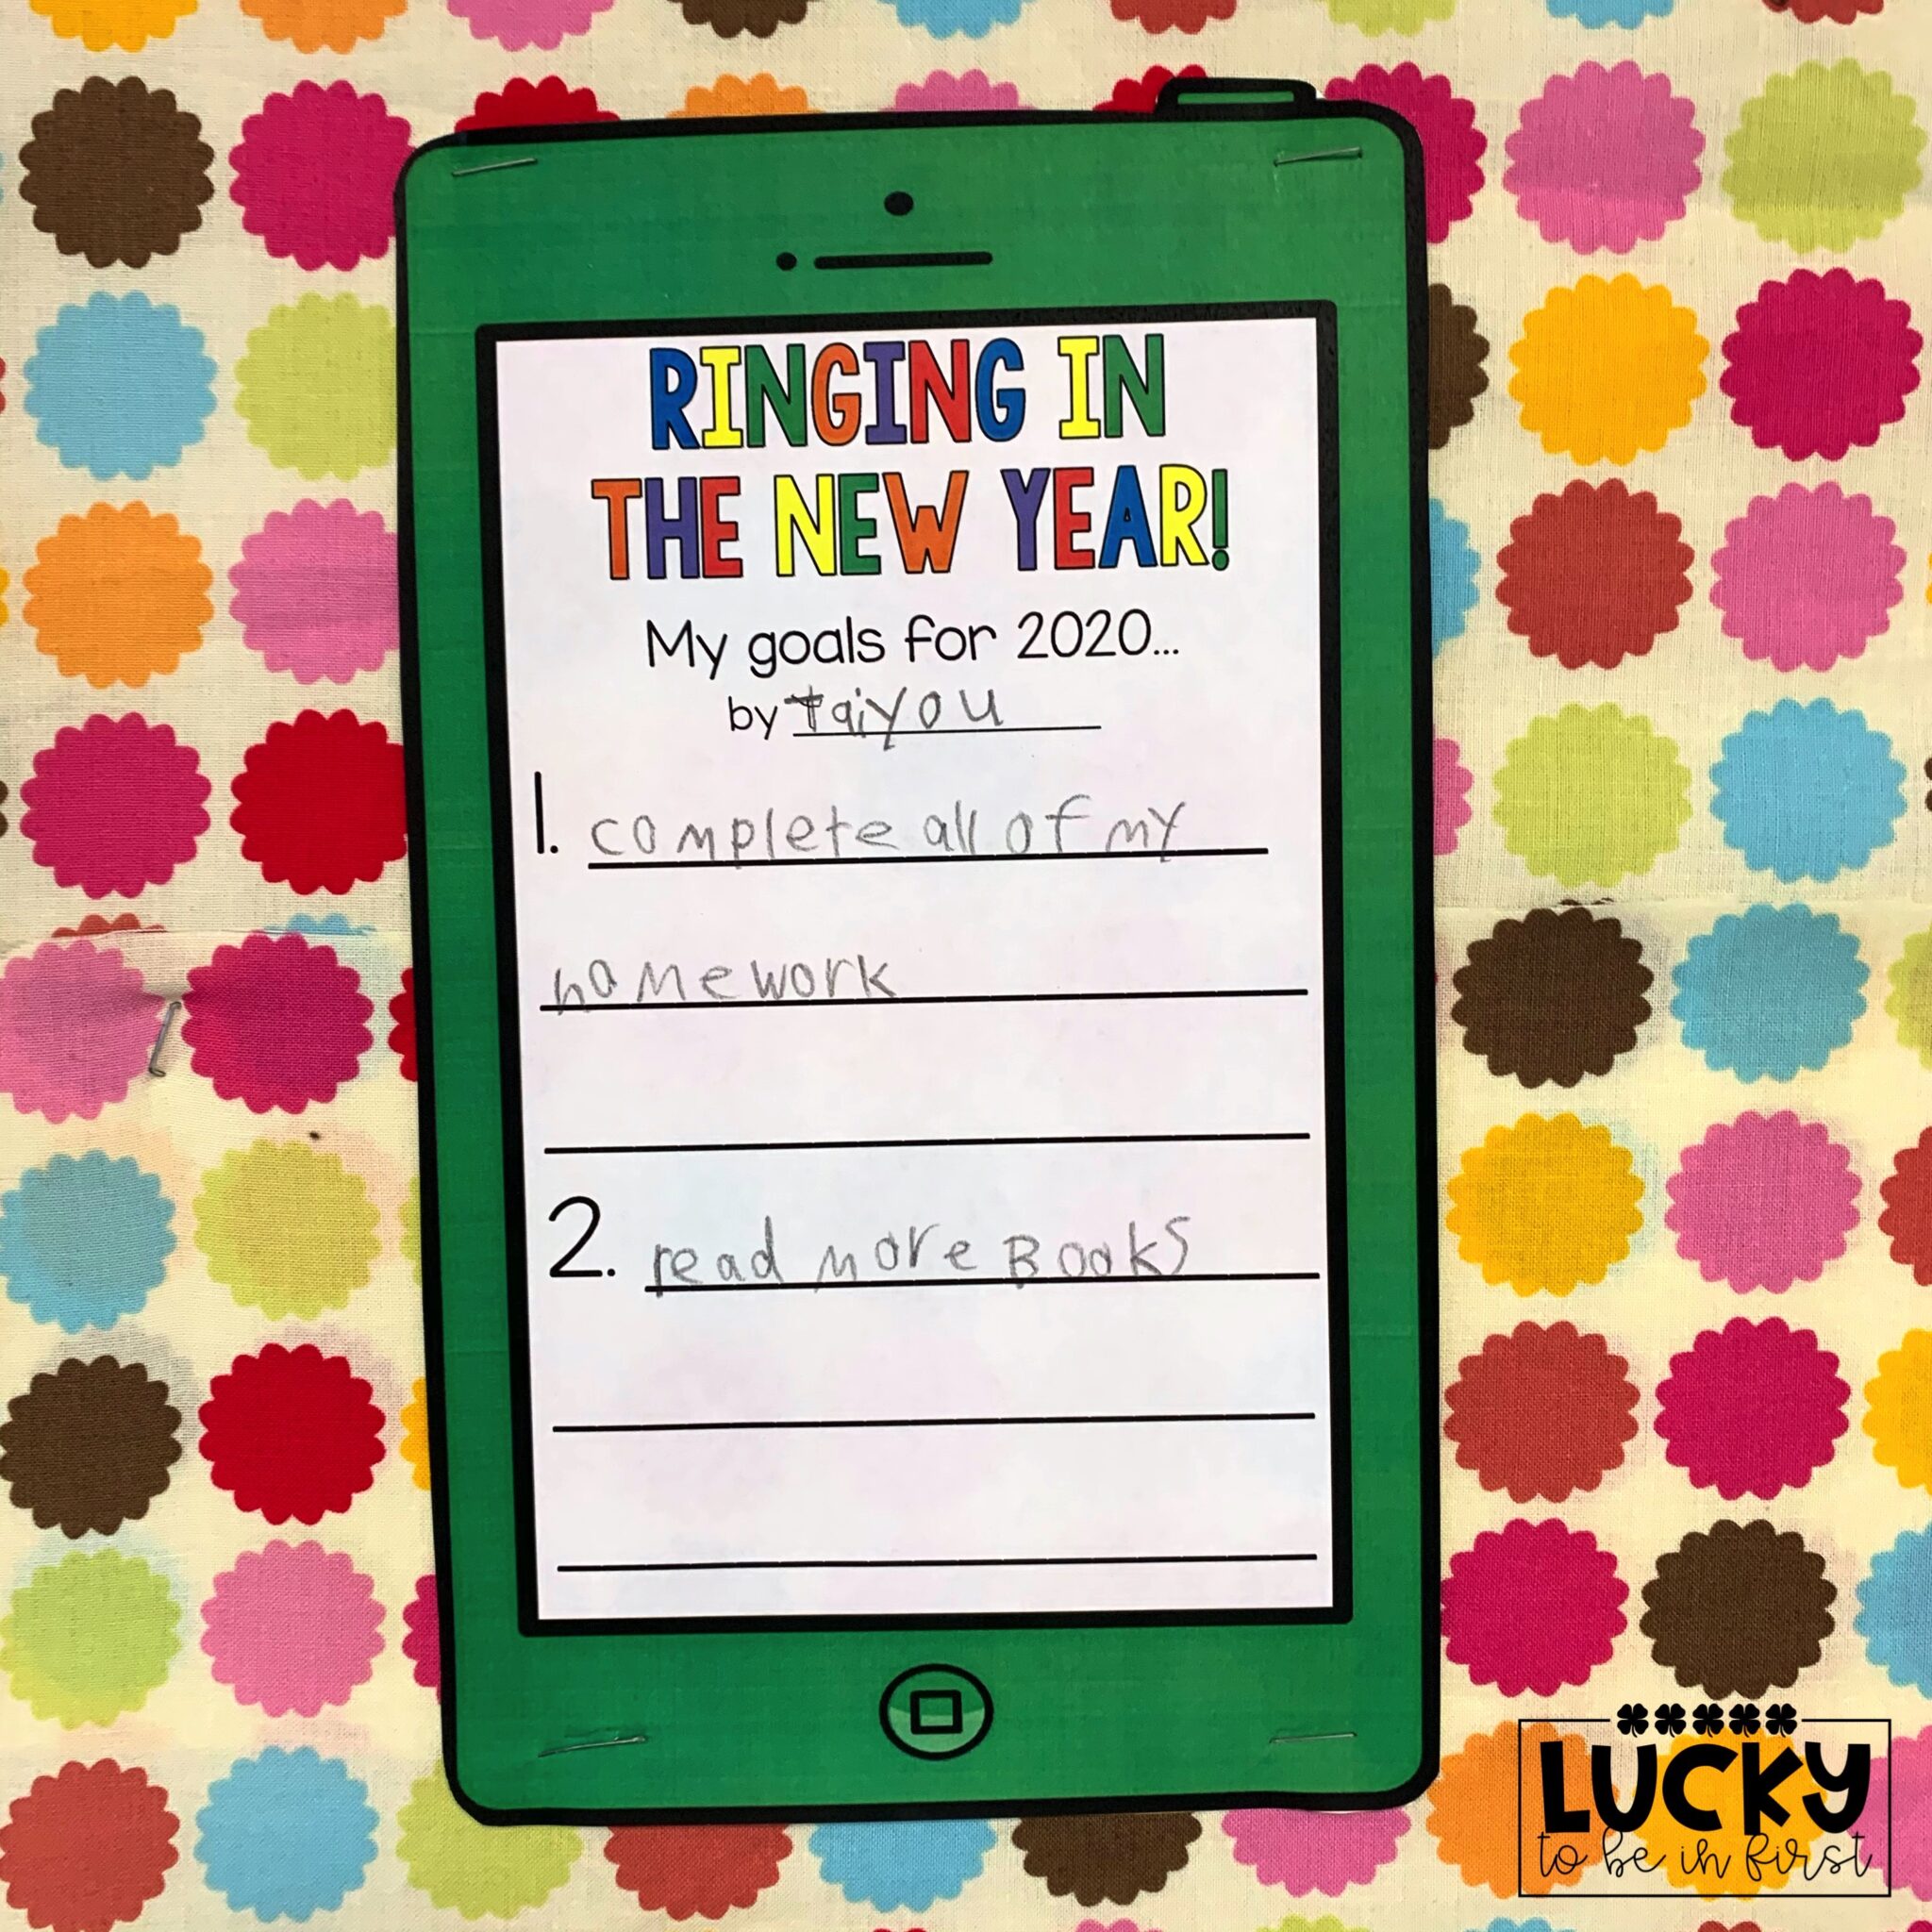 ringing in the new year goals activity for elementary students | Lucky Learning with Molly Lynch 